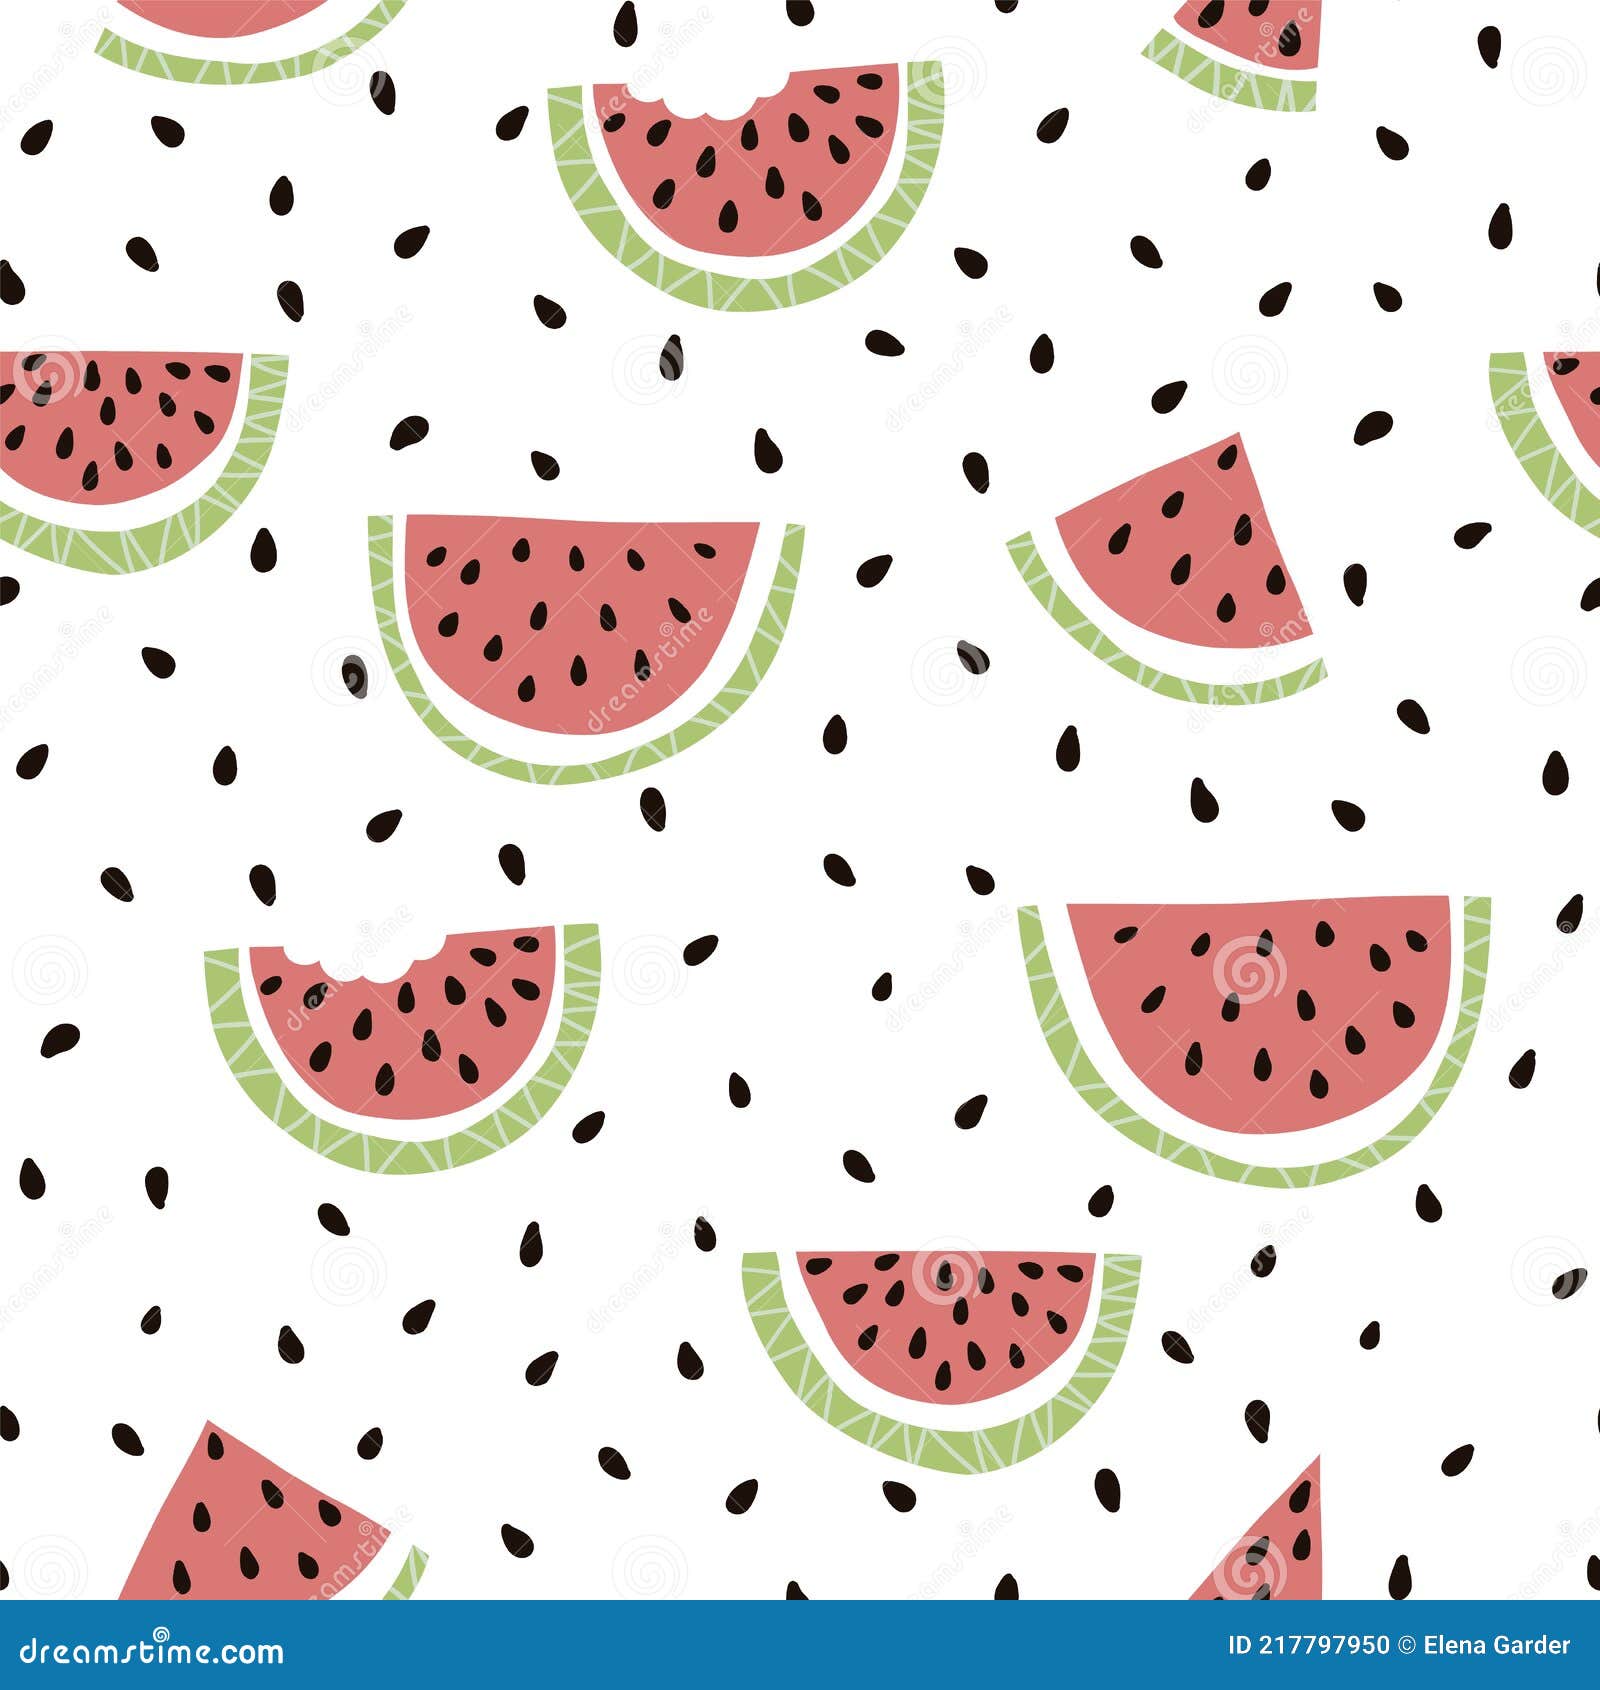 Lime Watermelon Summer Fruit Background Wallpaper Image For Free Download   Pngtree